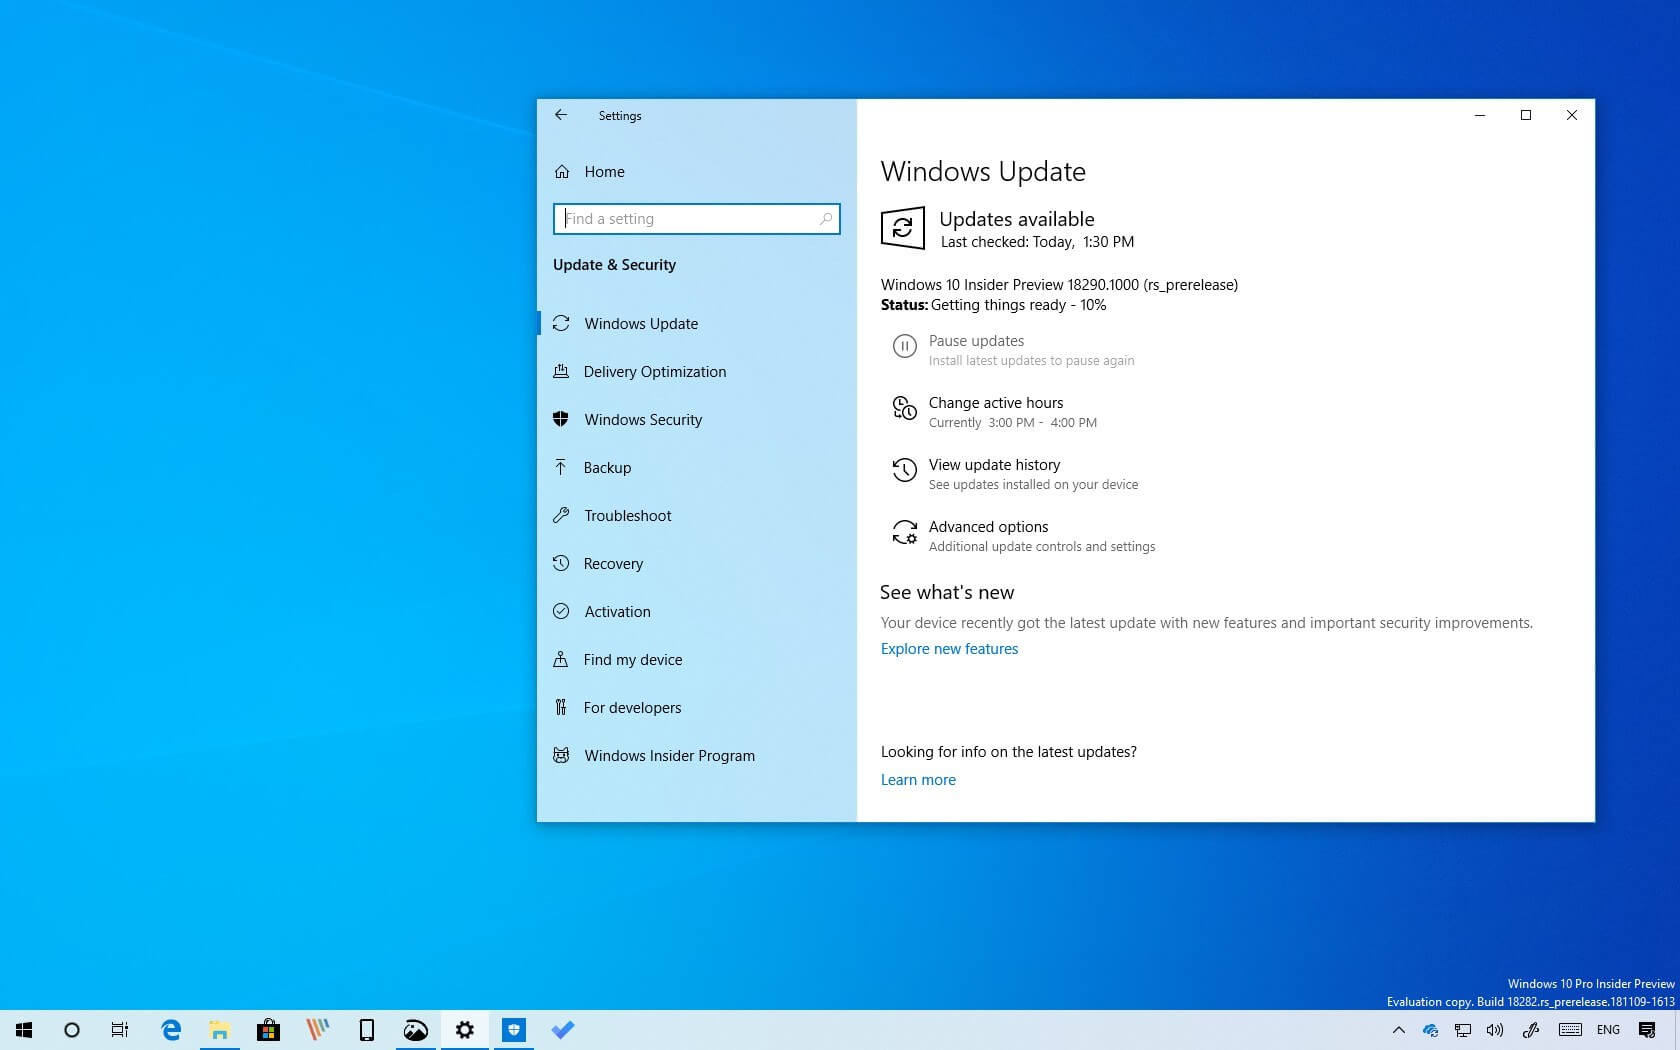 Windows 10 will begin reserving 7GB or more for updates